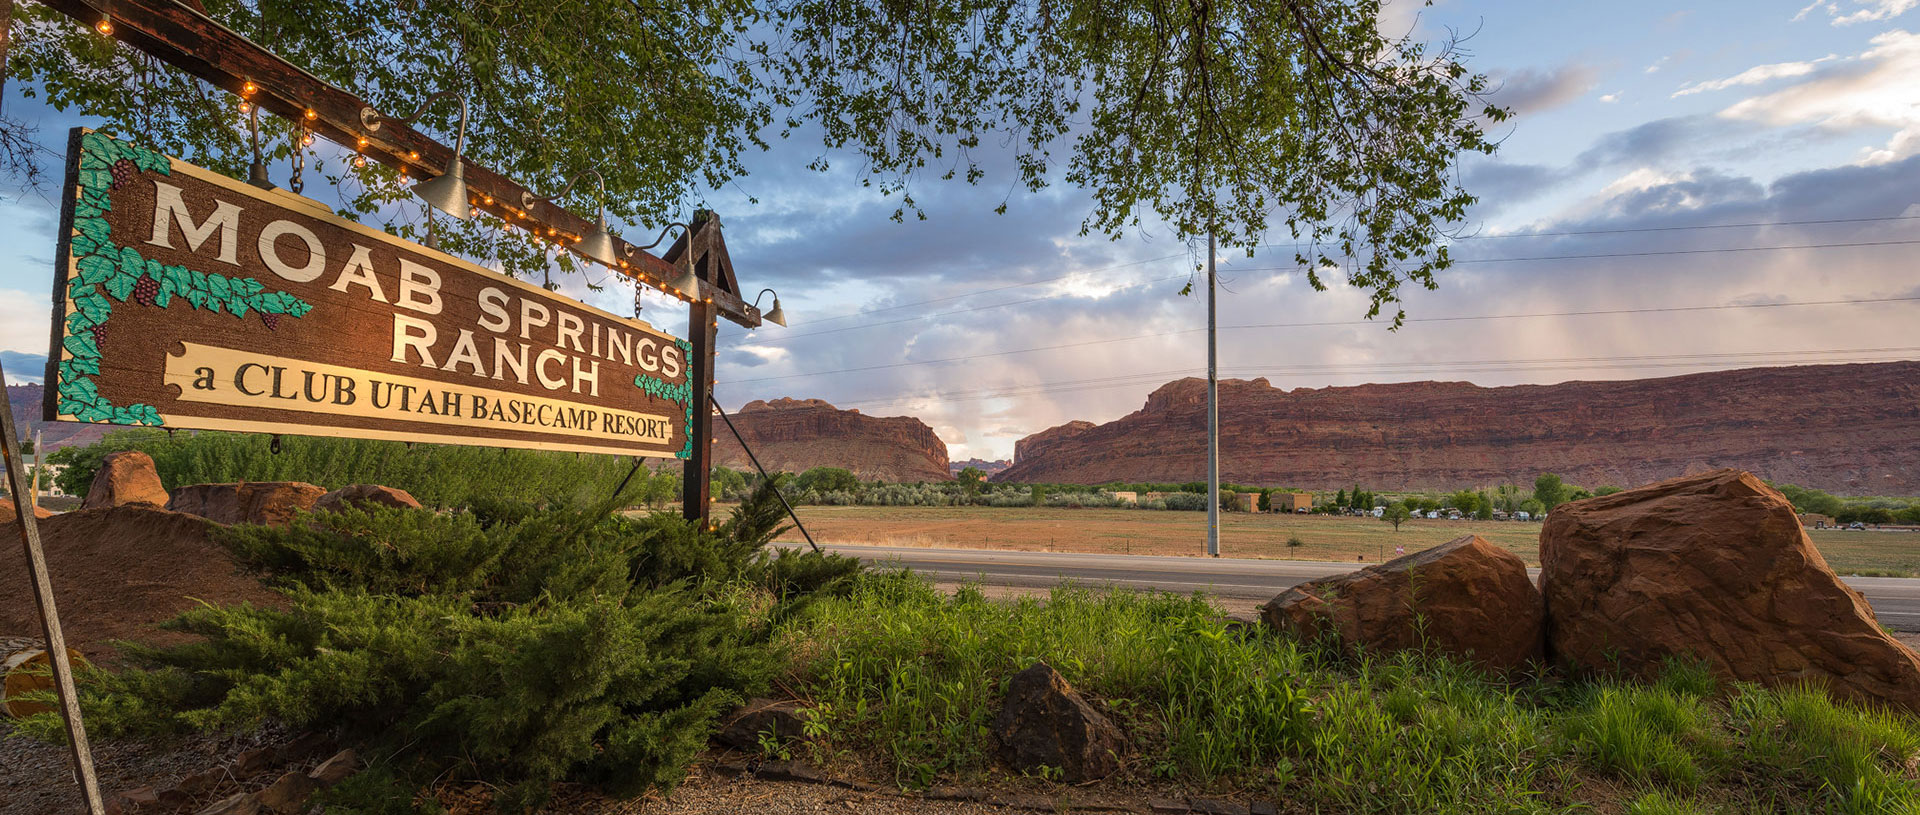 Roadside sign of Moab Springs Ranch in white letter typeset against a brown wood backdrop and green leaf motifs of the corporate logo.